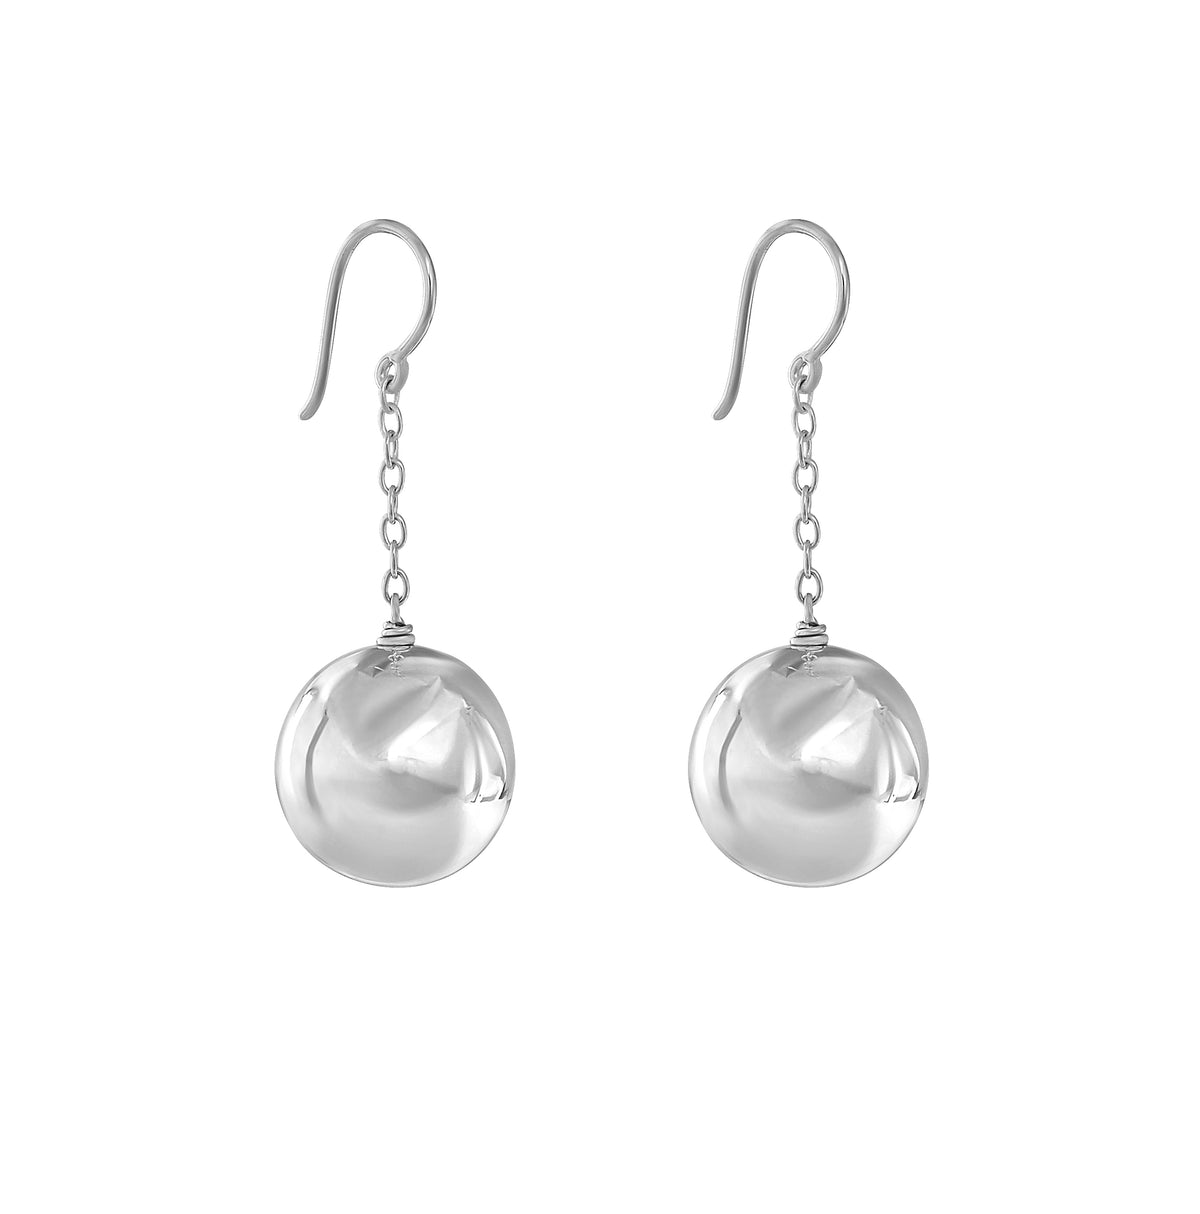 VIKA jewels ohrringe SELF LOVE COLLECTION earrings Hook hollow ball pairs 925 recycled sterling silver handmade Bali